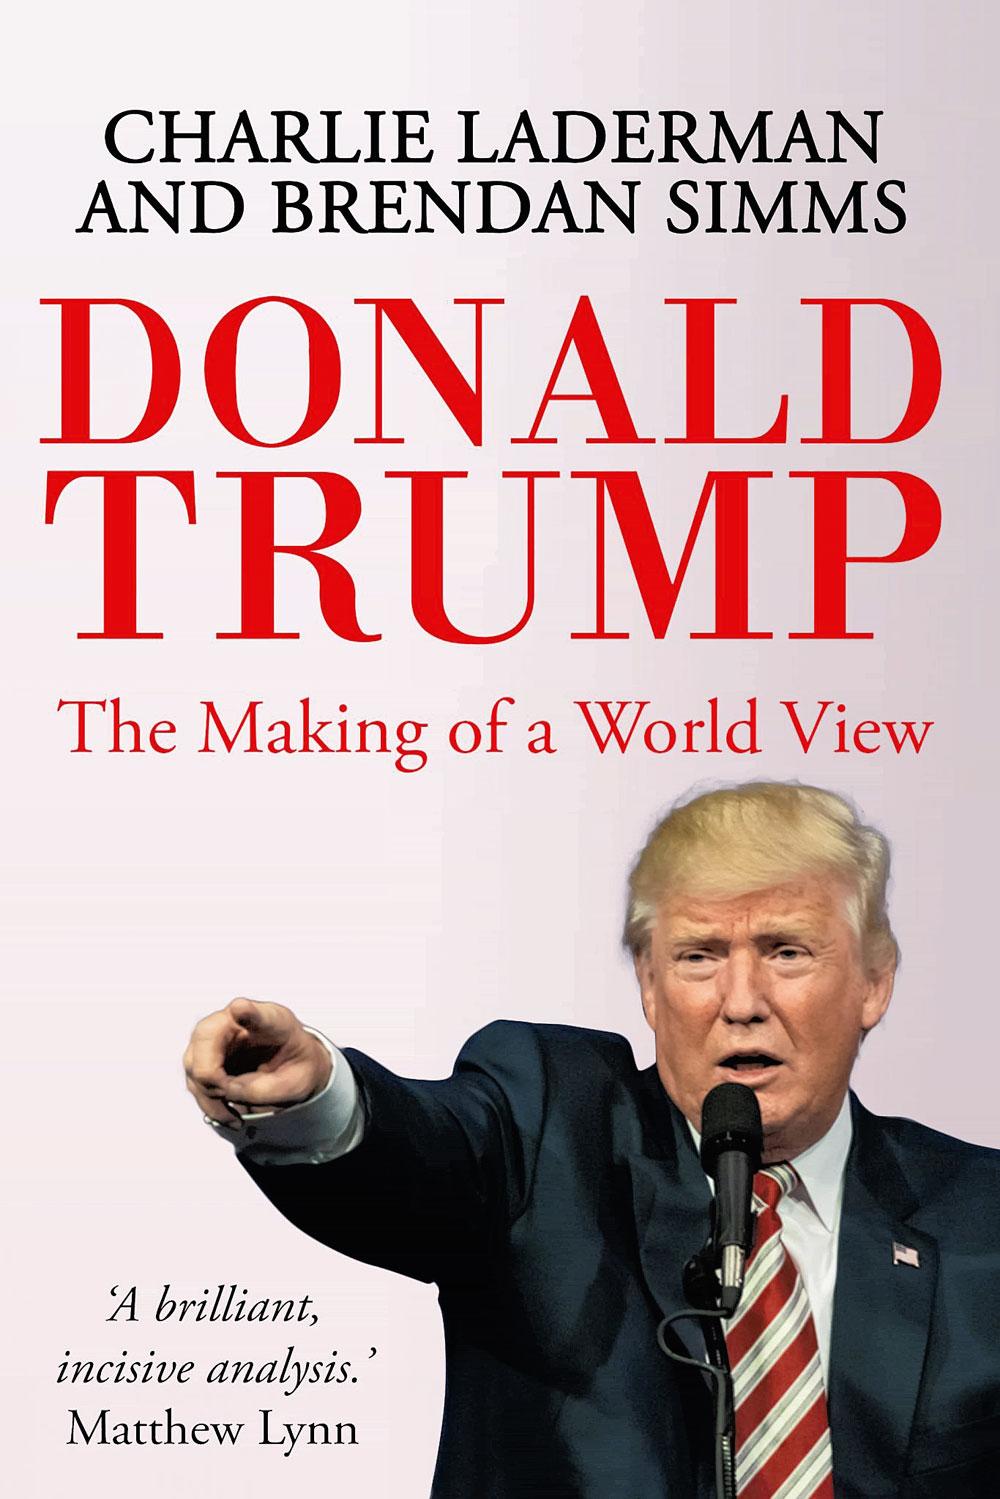 Charlie Laderman & Brendan Simms, Donald Trump: The Making of a World View, Endeavour Press